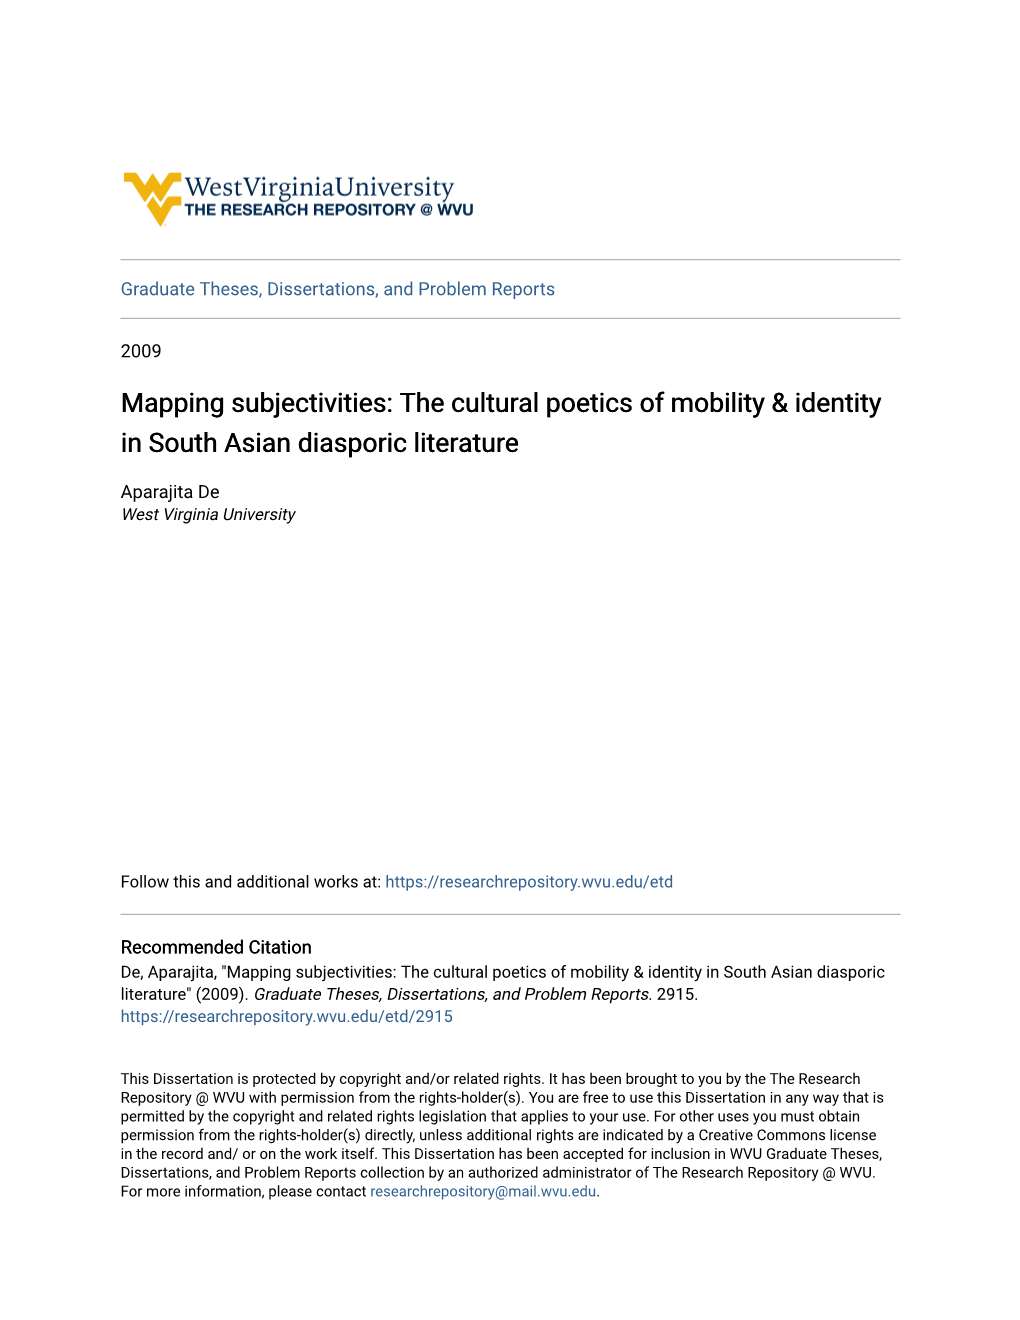 The Cultural Poetics of Mobility & Identity in South Asian Diasporic